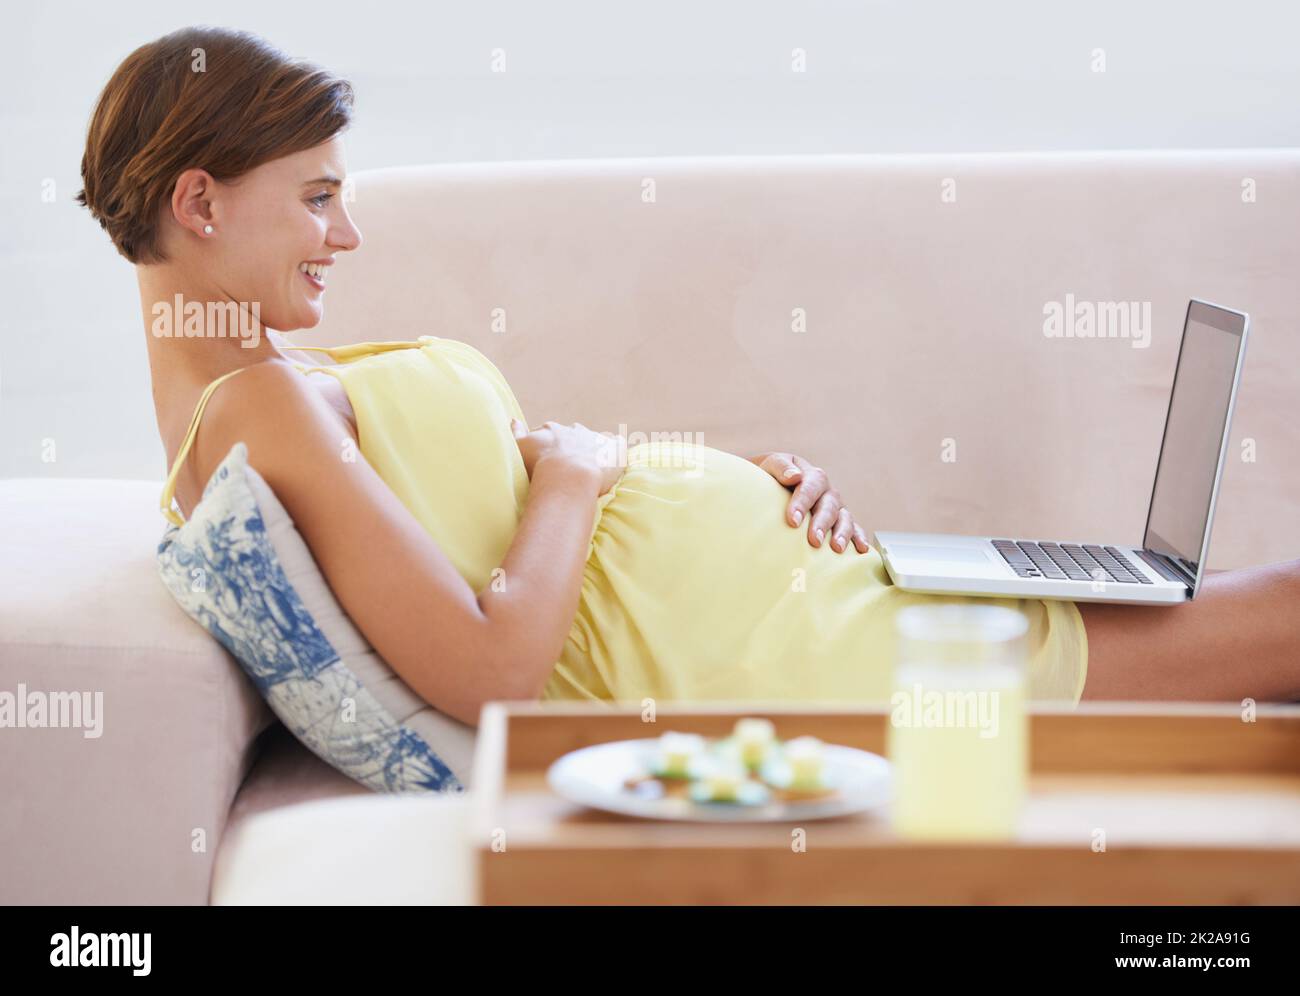 In good spirits. A smiling pregnant woman lying on the couch using a laptop with a healthy meal beside her. Stock Photo